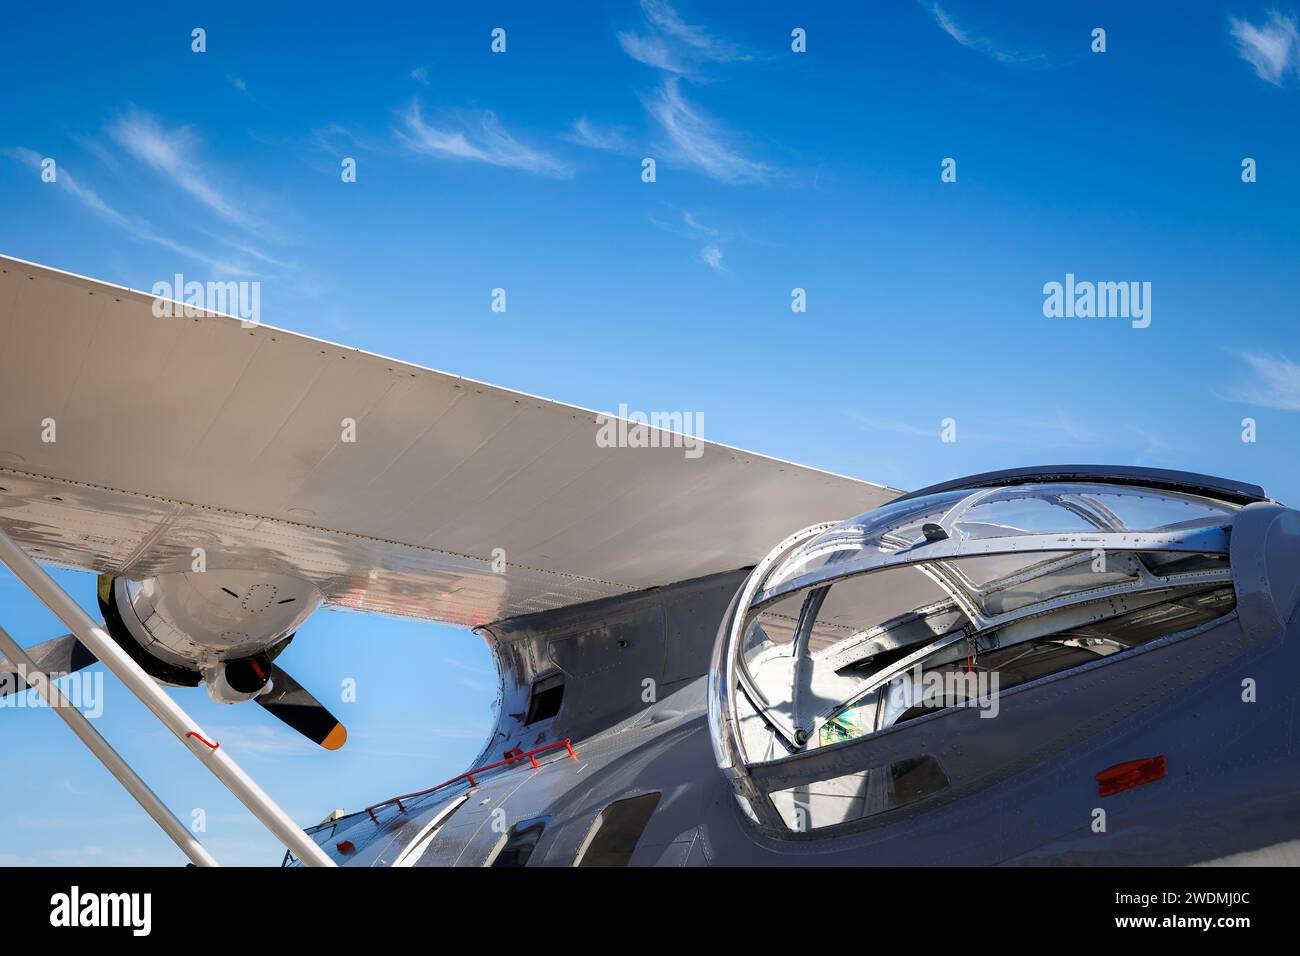 The side bubble window of a PBY Catalina flying boat, one of the most widely used seaplanes of WWII, at America's Airshow 2023 in Miramar, California. Stock Photo